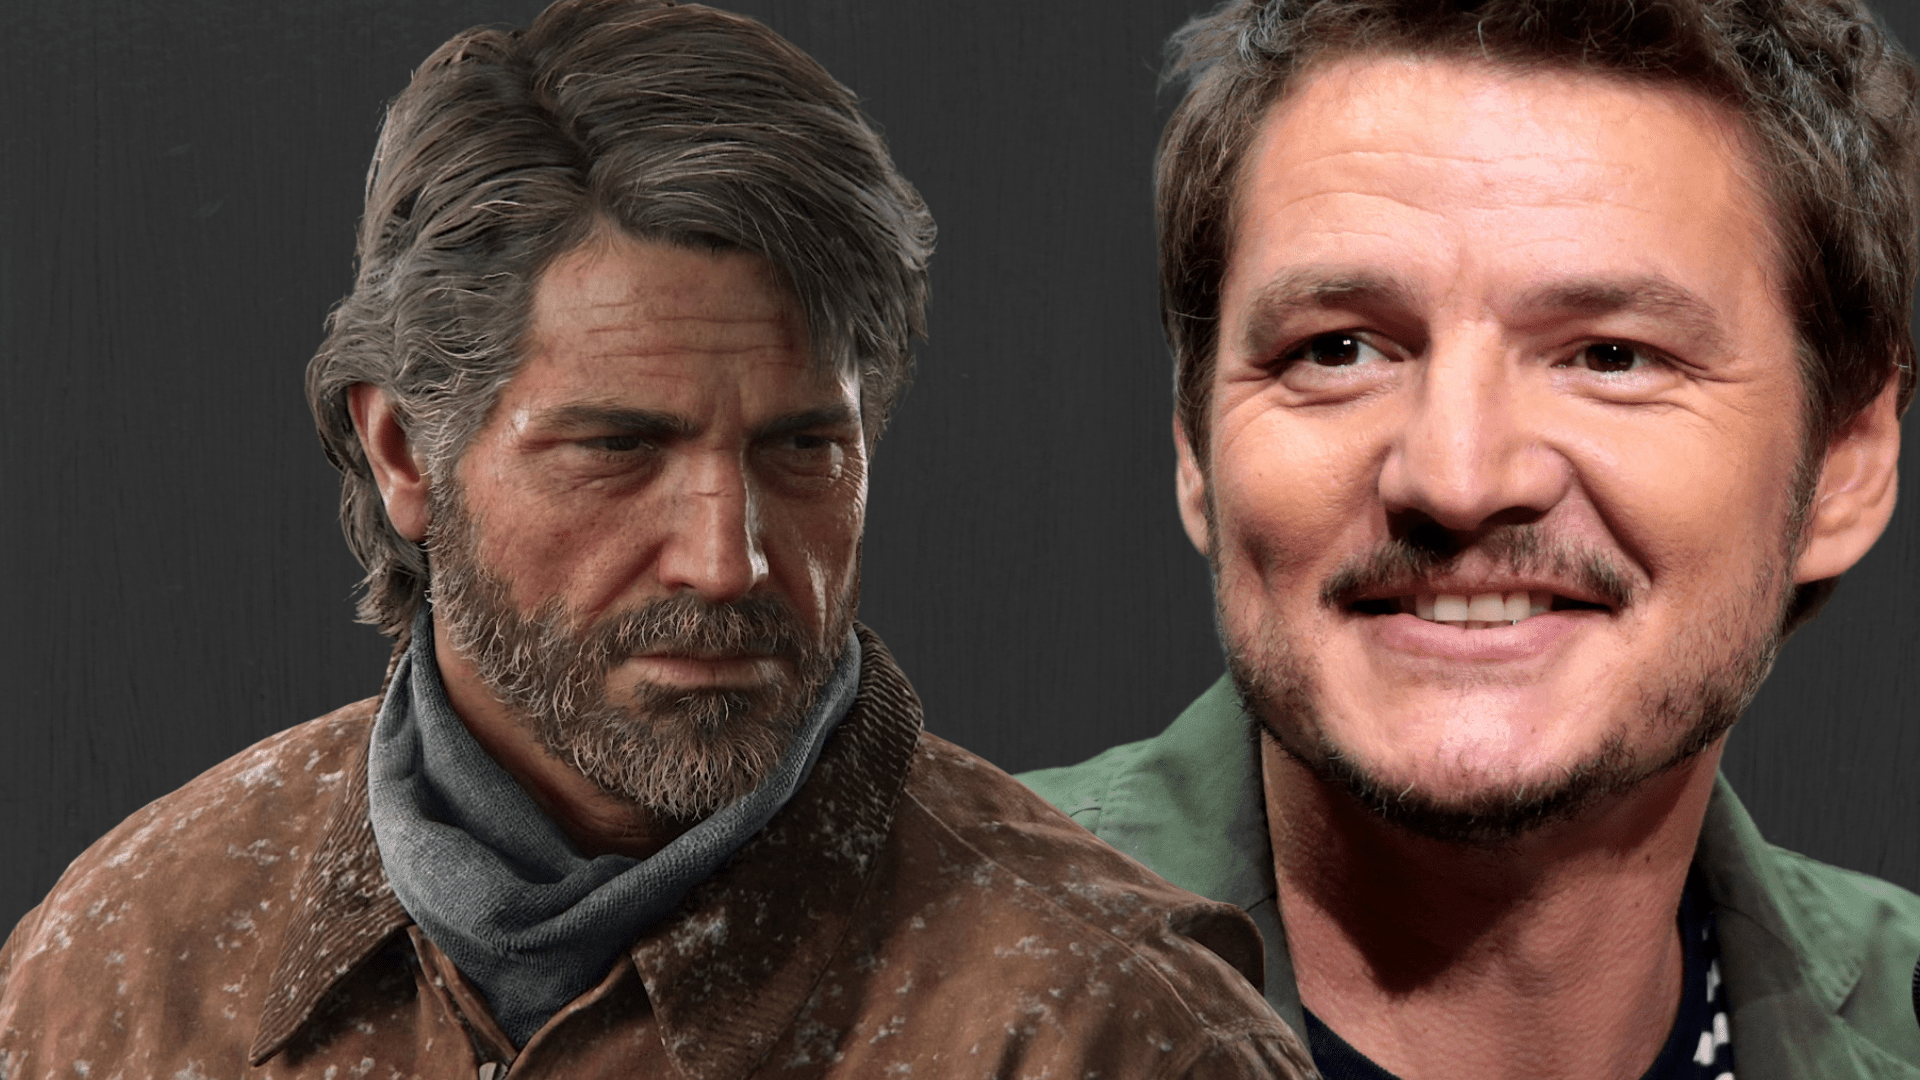 The Last of Us: fans did not want Pedro Pascal as Joel because of his beard